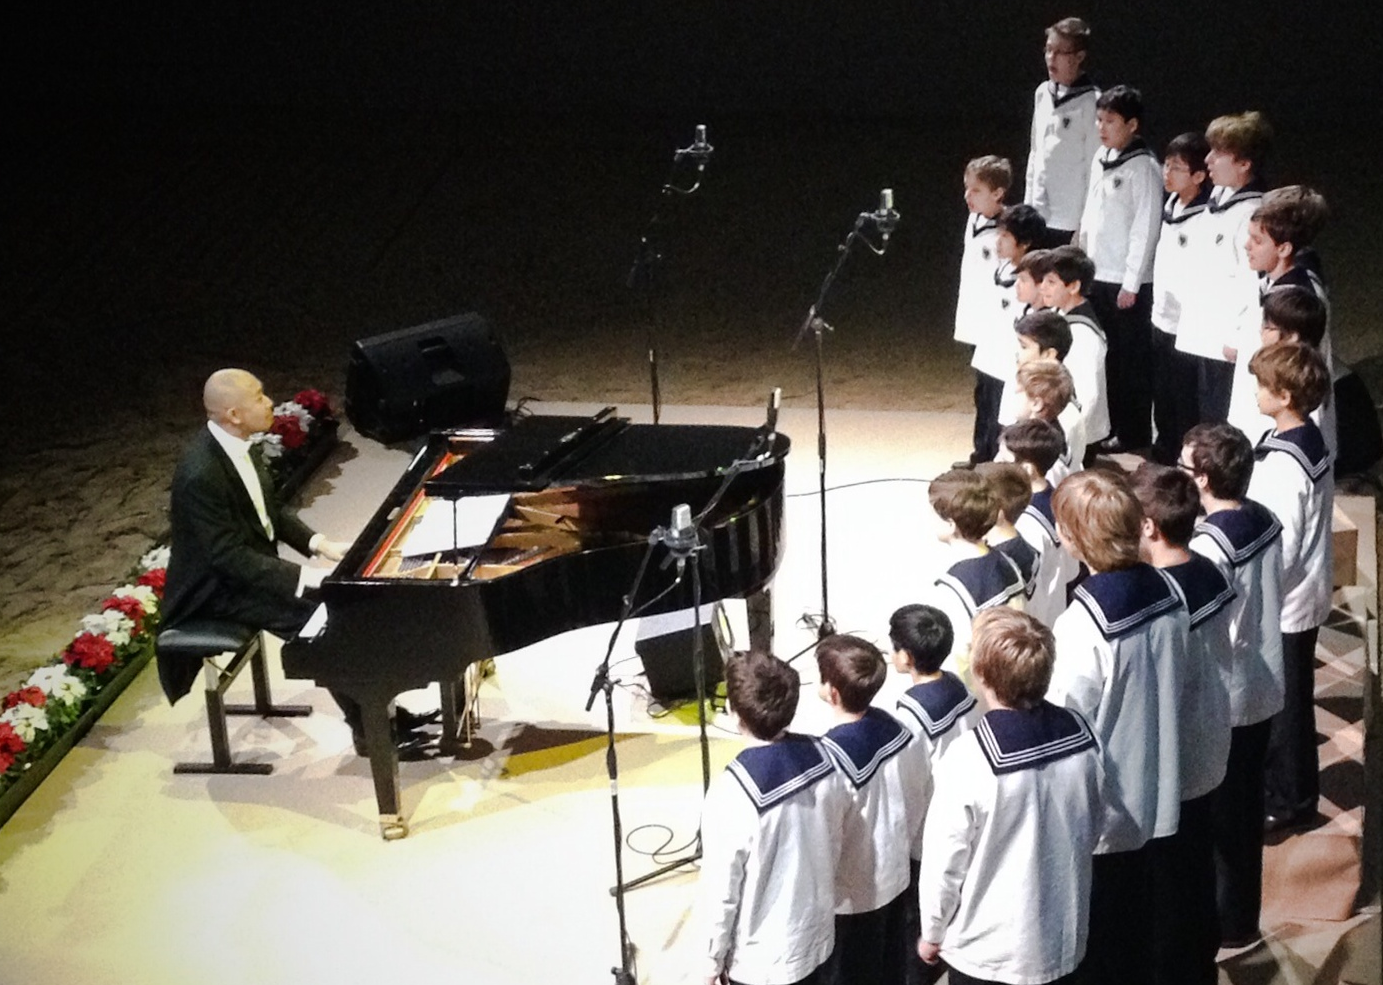 Jimmy Chiang with the Vienna Boys' Choir